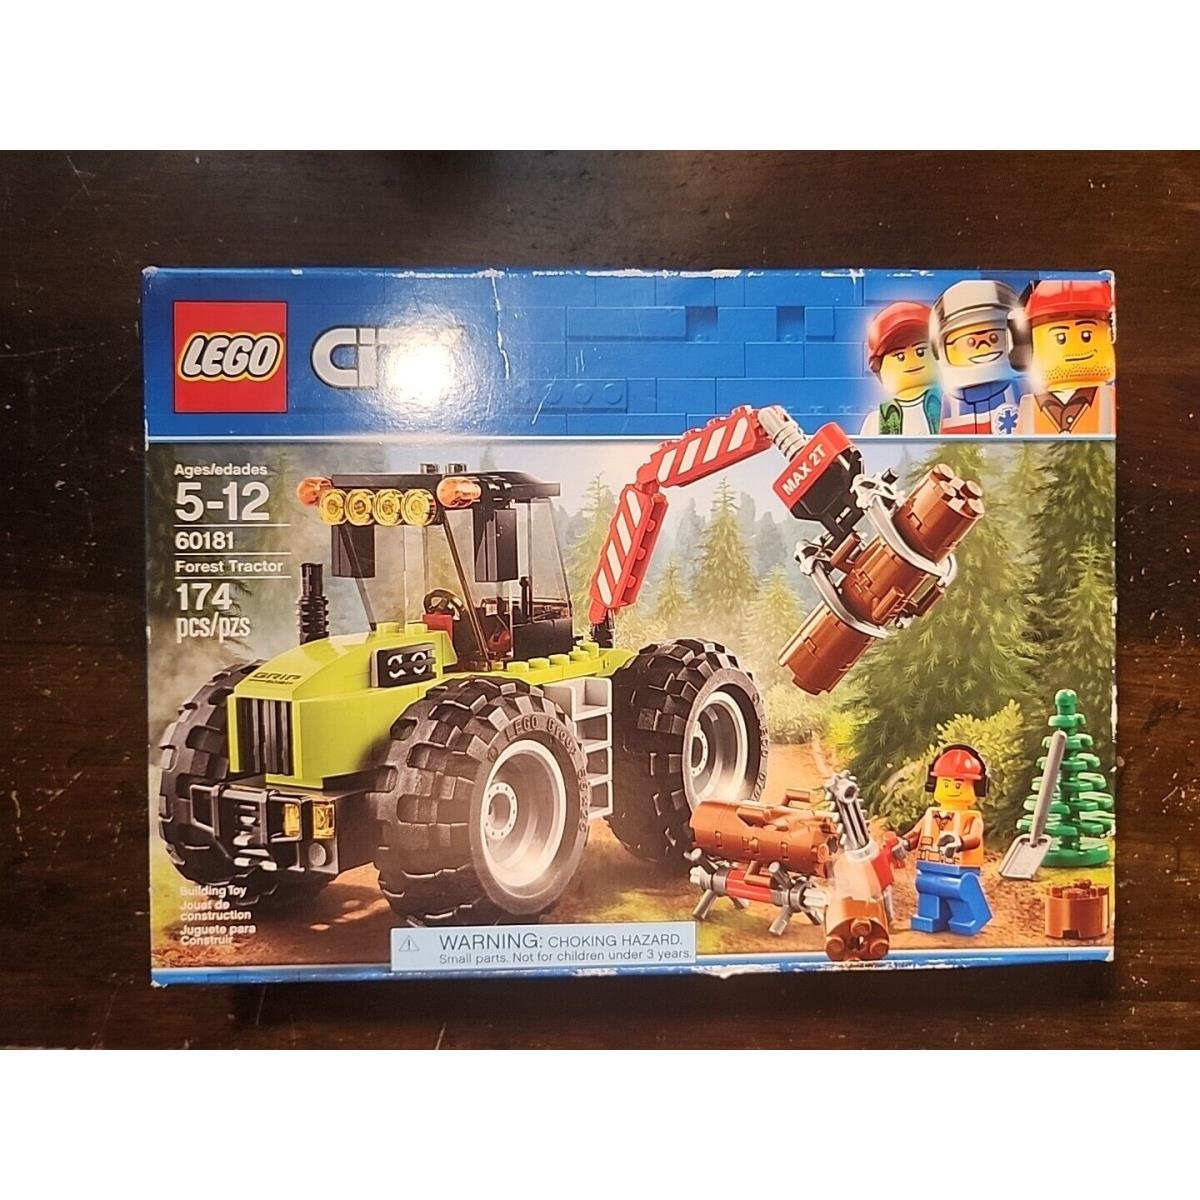 60181 Forest Tractor Lego Town City Legos Set Great Vehicle Logging Ranger